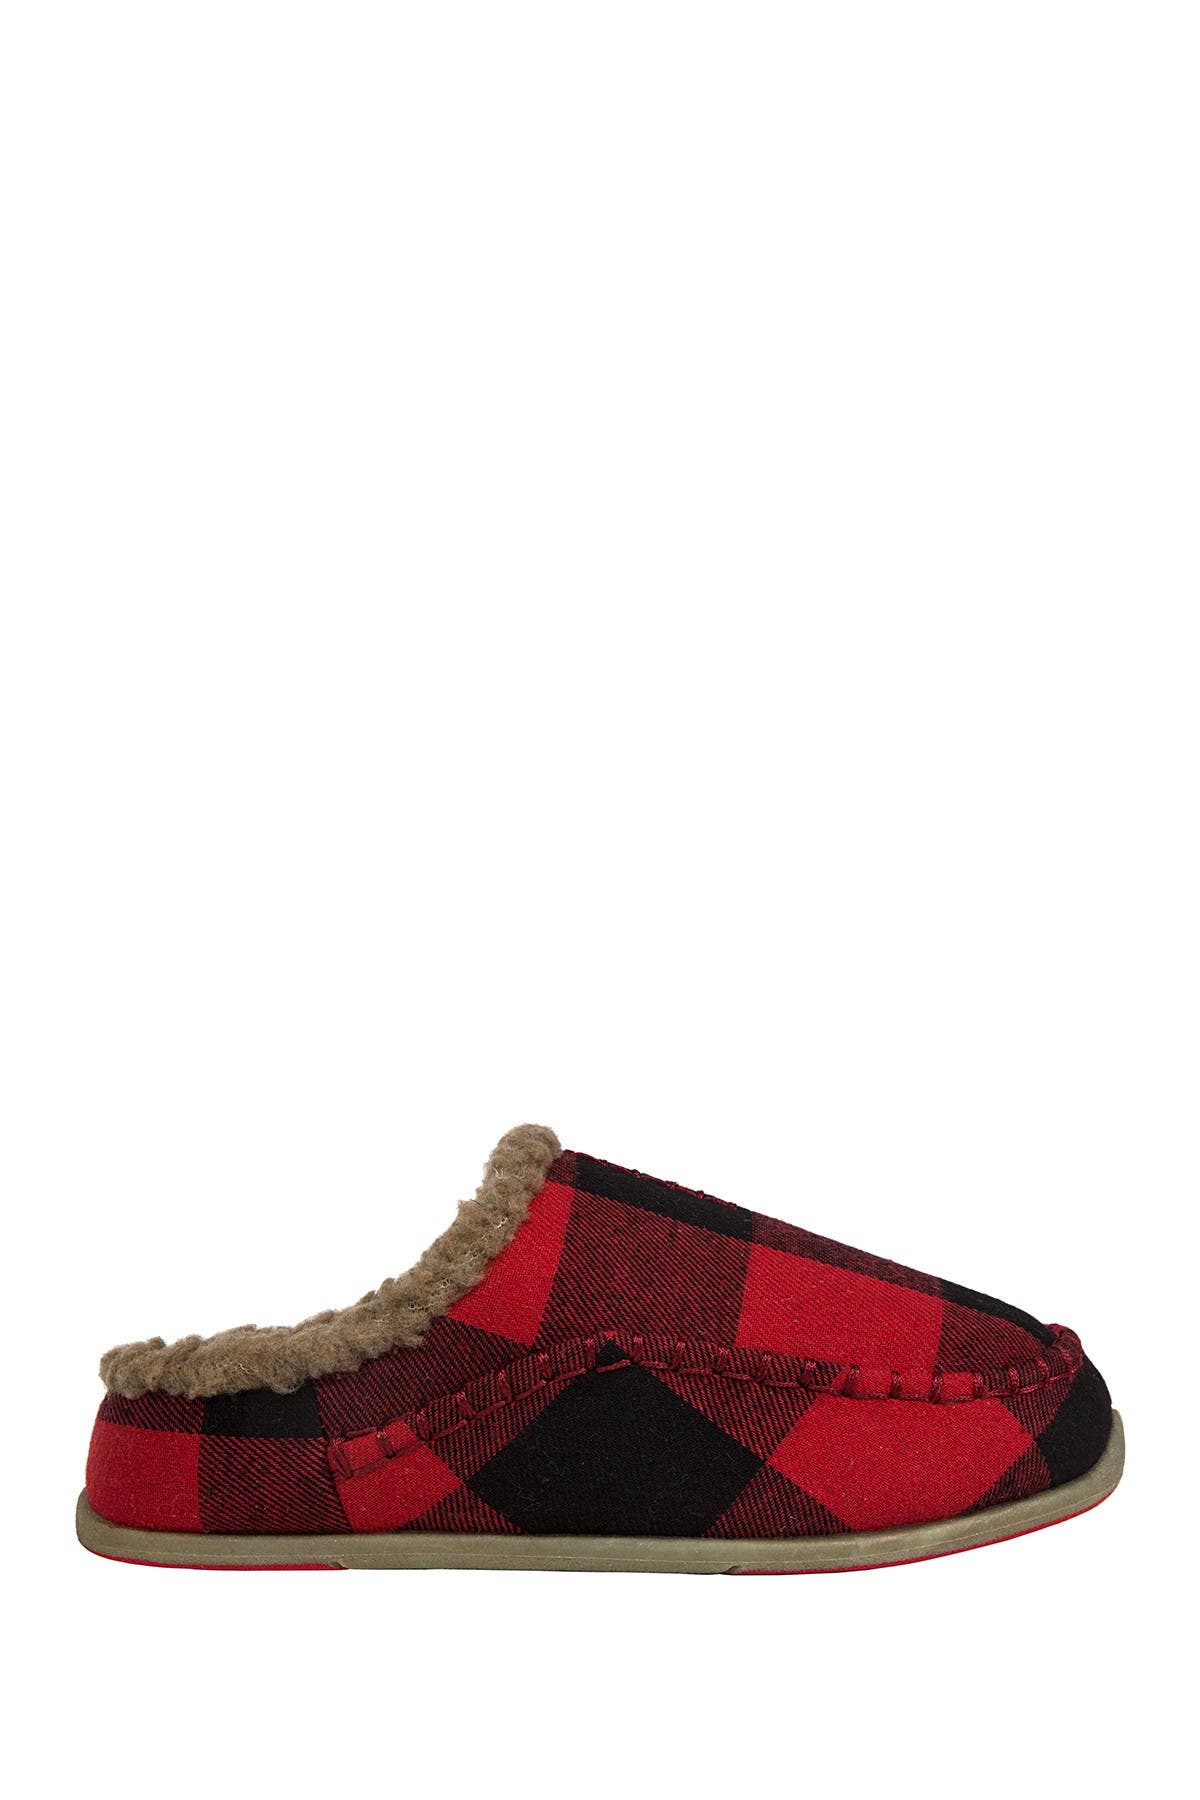 Deer Stags Kids' Slipperooz Lil' Nordic Faux Shearling Lined Plaid Slipper In Medium Red